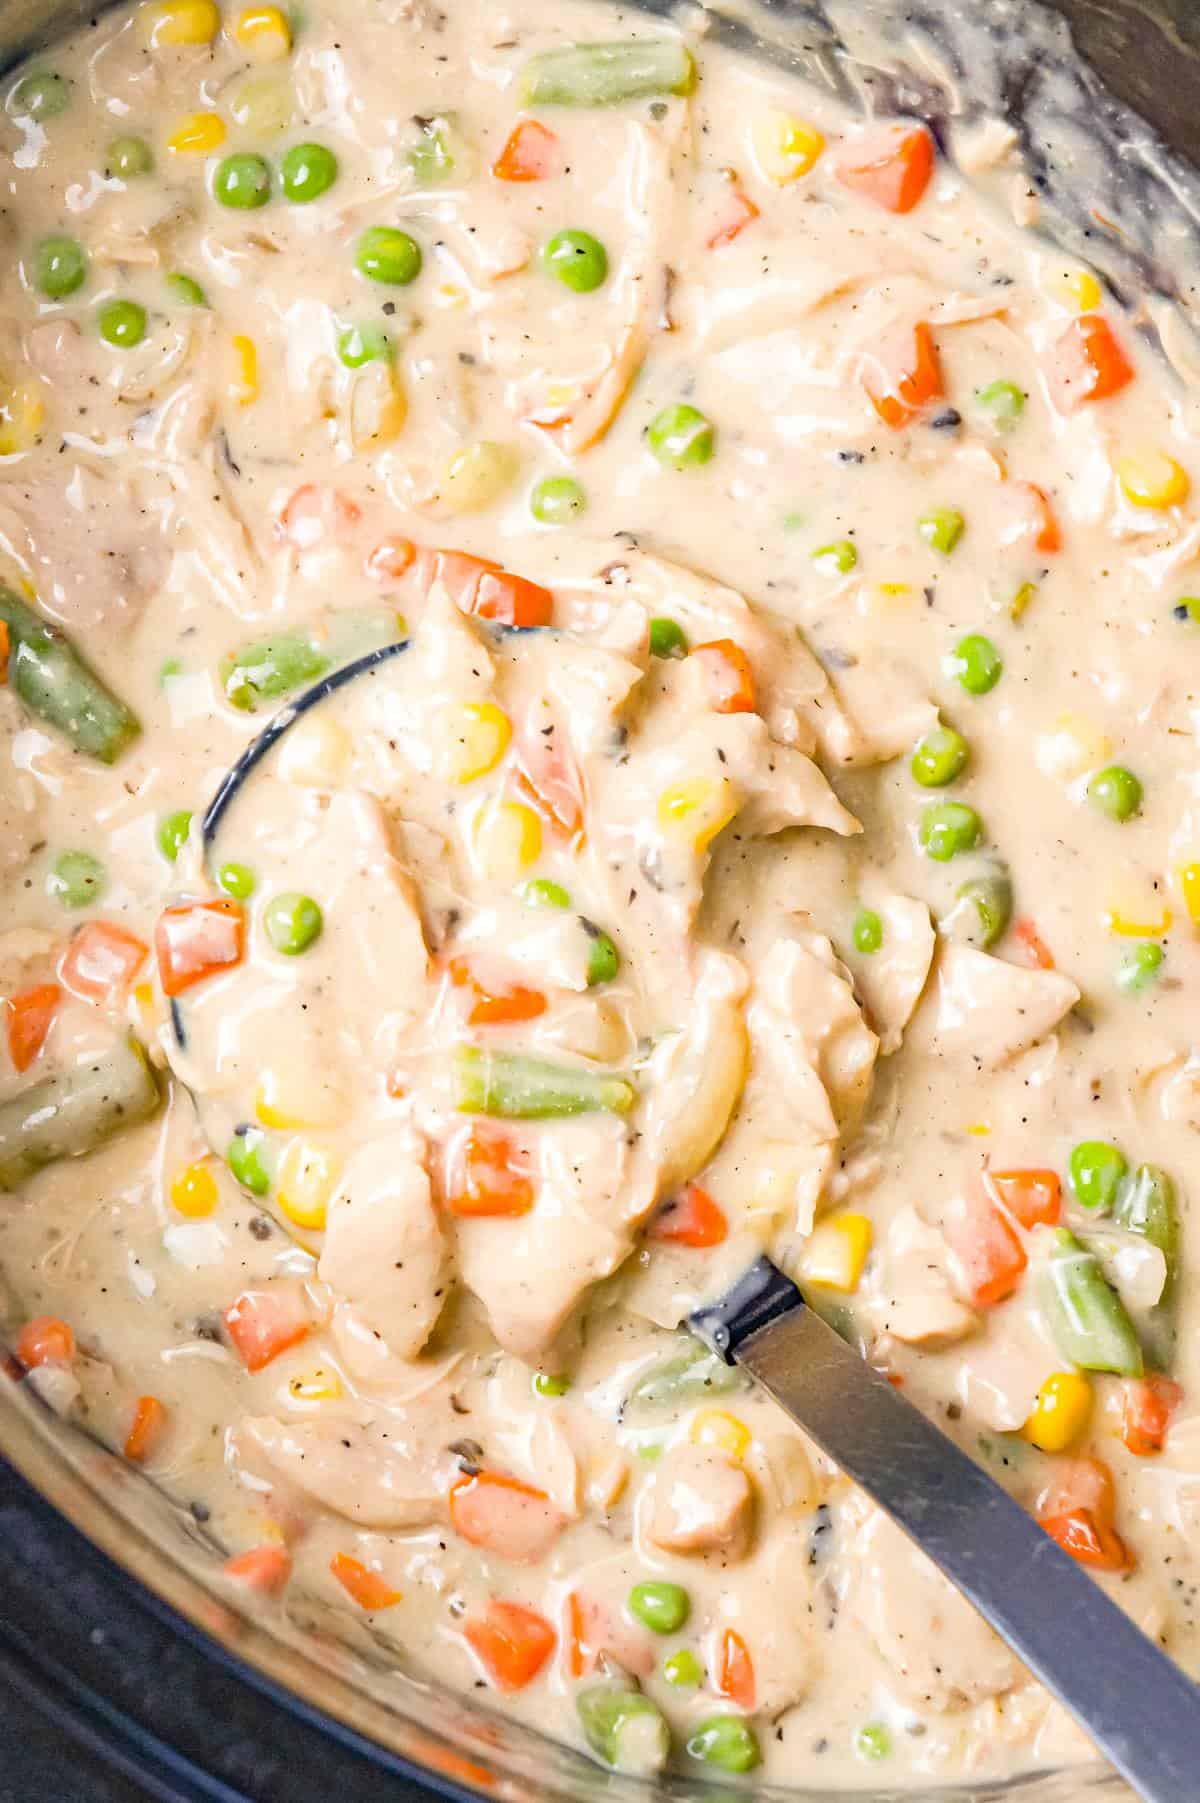 Crock Pot Chicken Pot Pie is an easy slow cooker dinner recipe made with boneless, skinless chicken thighs, cream of mushroom soup, cream of chicken soup and mixed veggies and topped with Pillsbury biscuits.